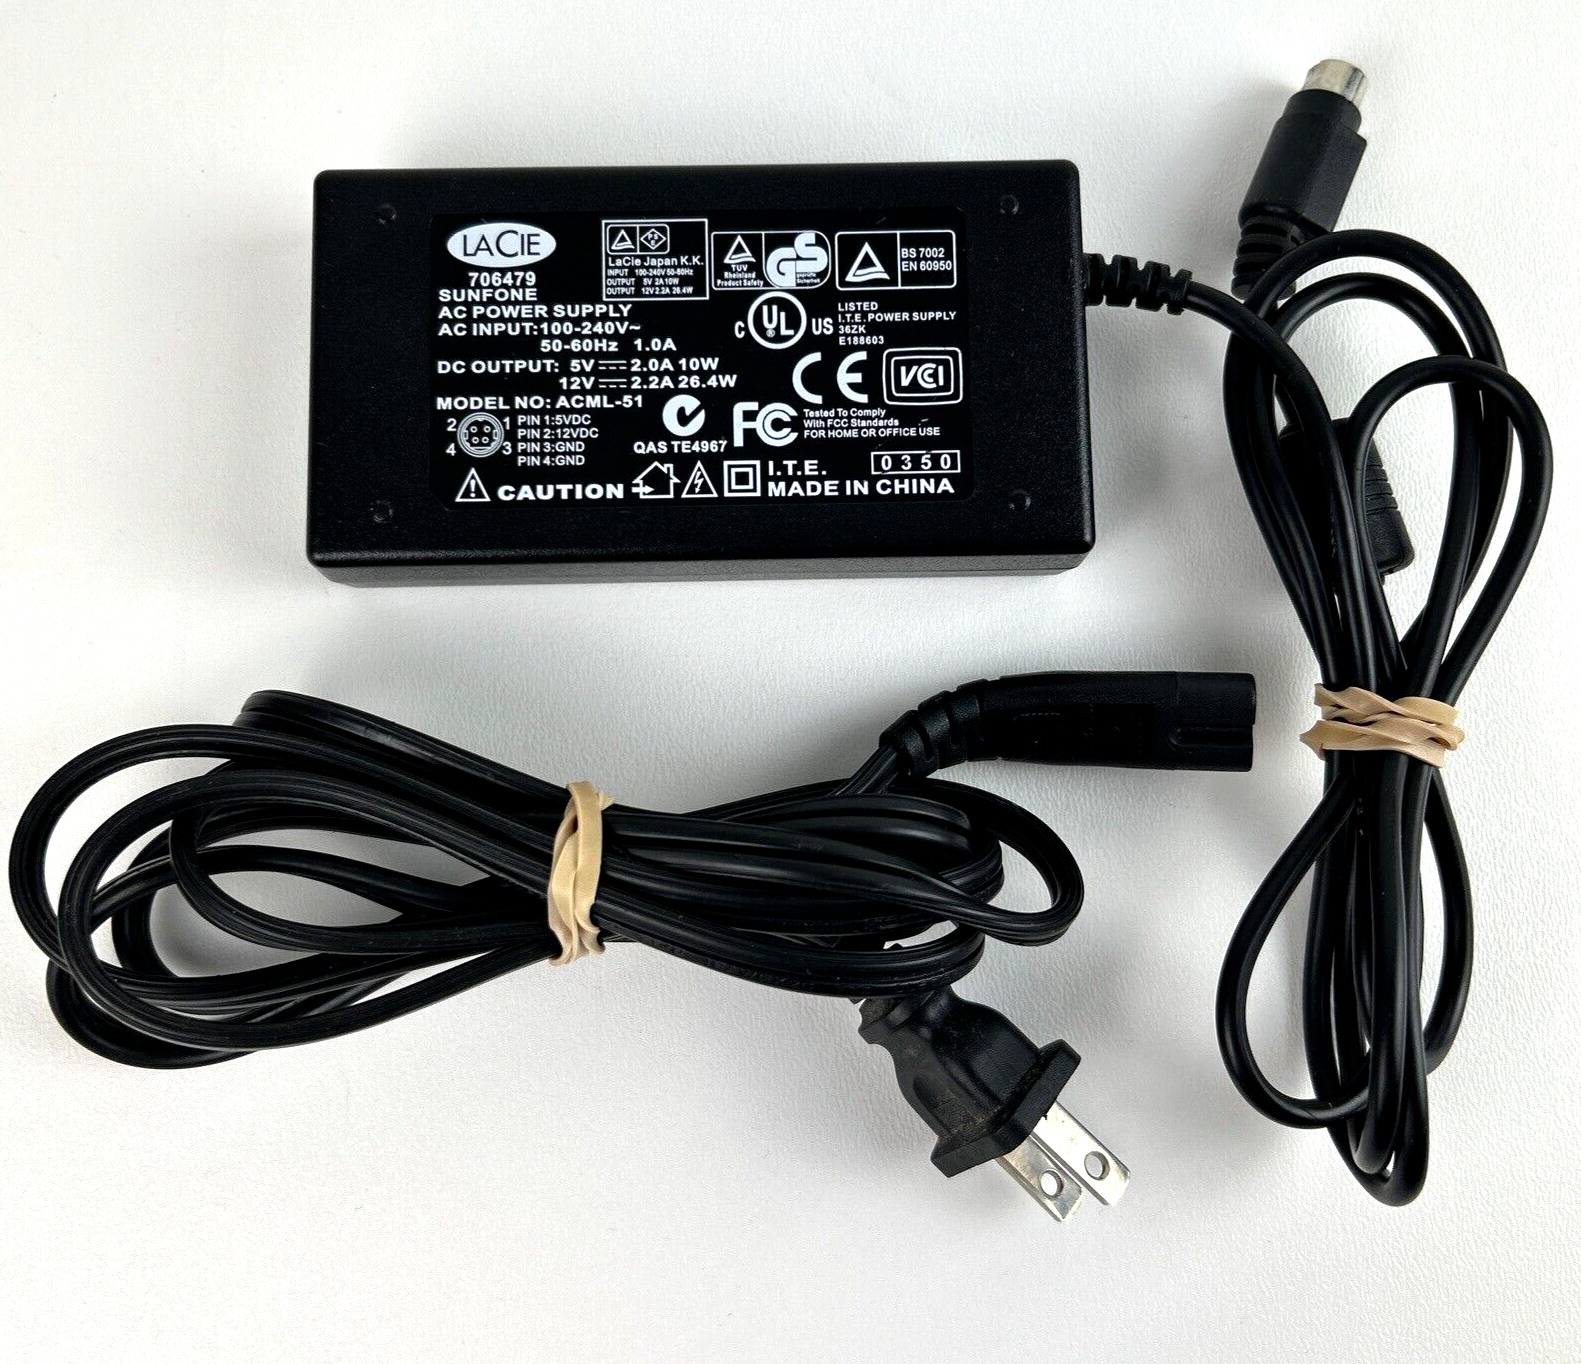 4-Pin AC Adapter For LACIE 706479 SUNFONE ACML-51 Charger Power Supply Cord